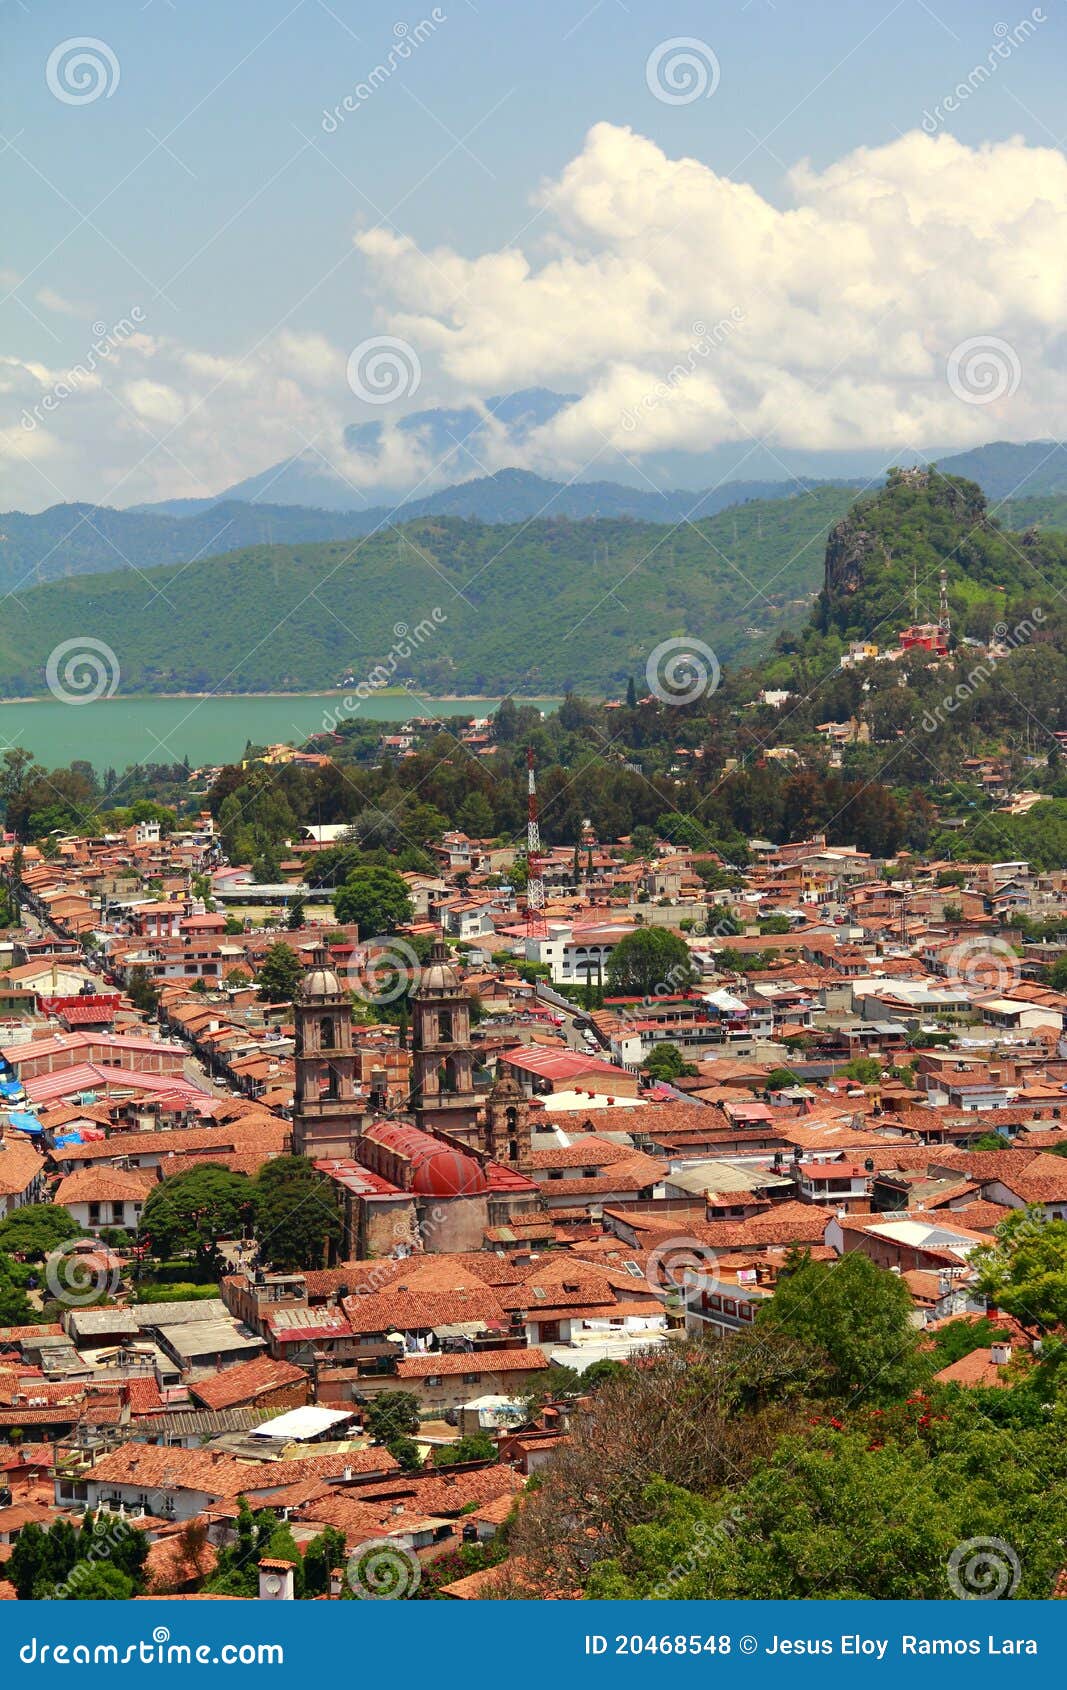 tile roofs of the city of valle de bravo, mexico iii